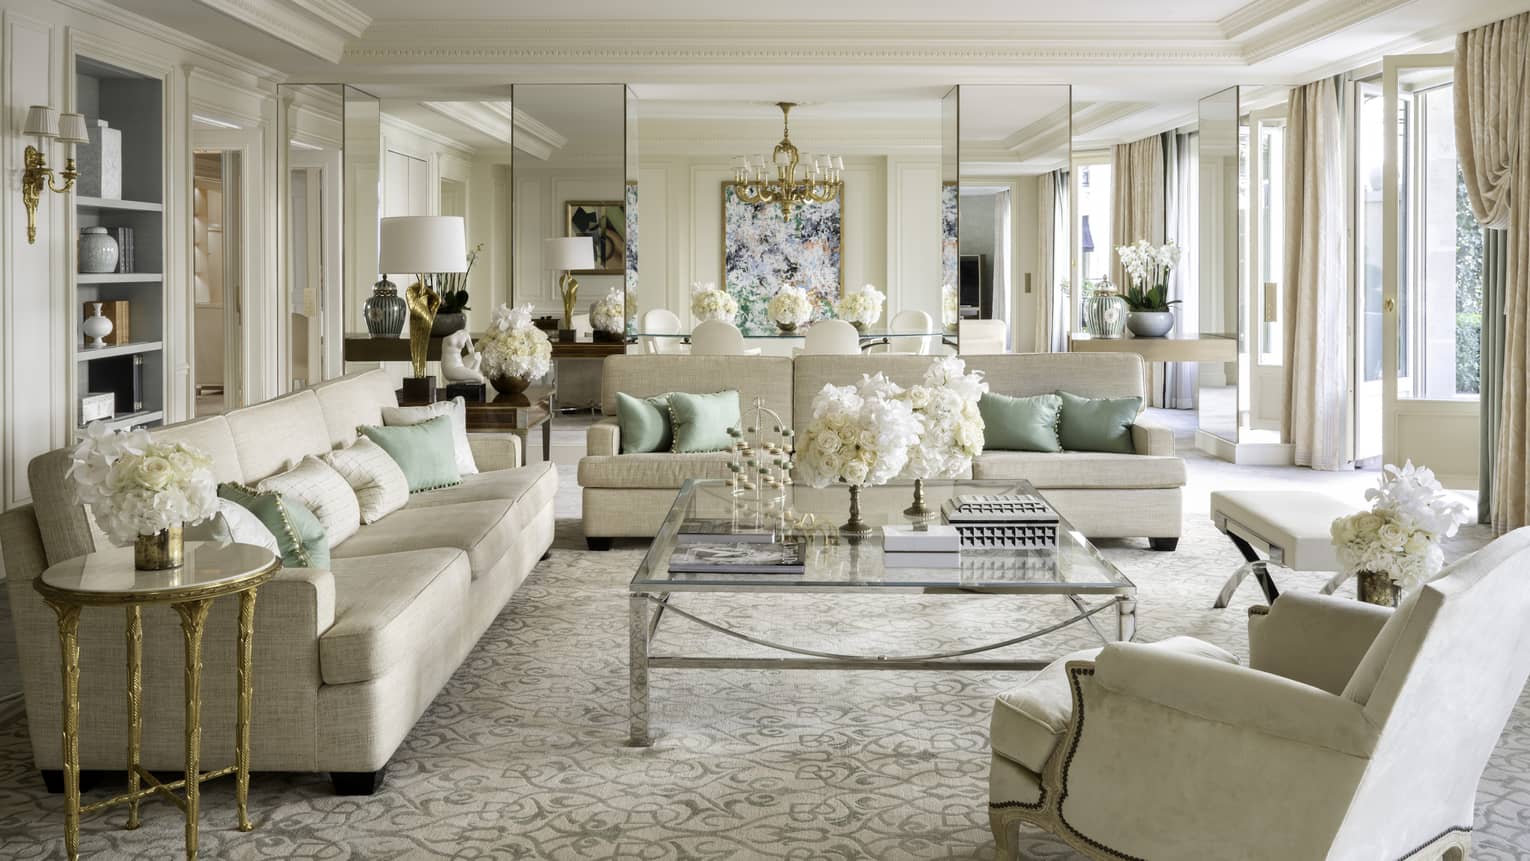 Royal suite with two couches, an armchair, coffee table, cream & teal accents, natural light 